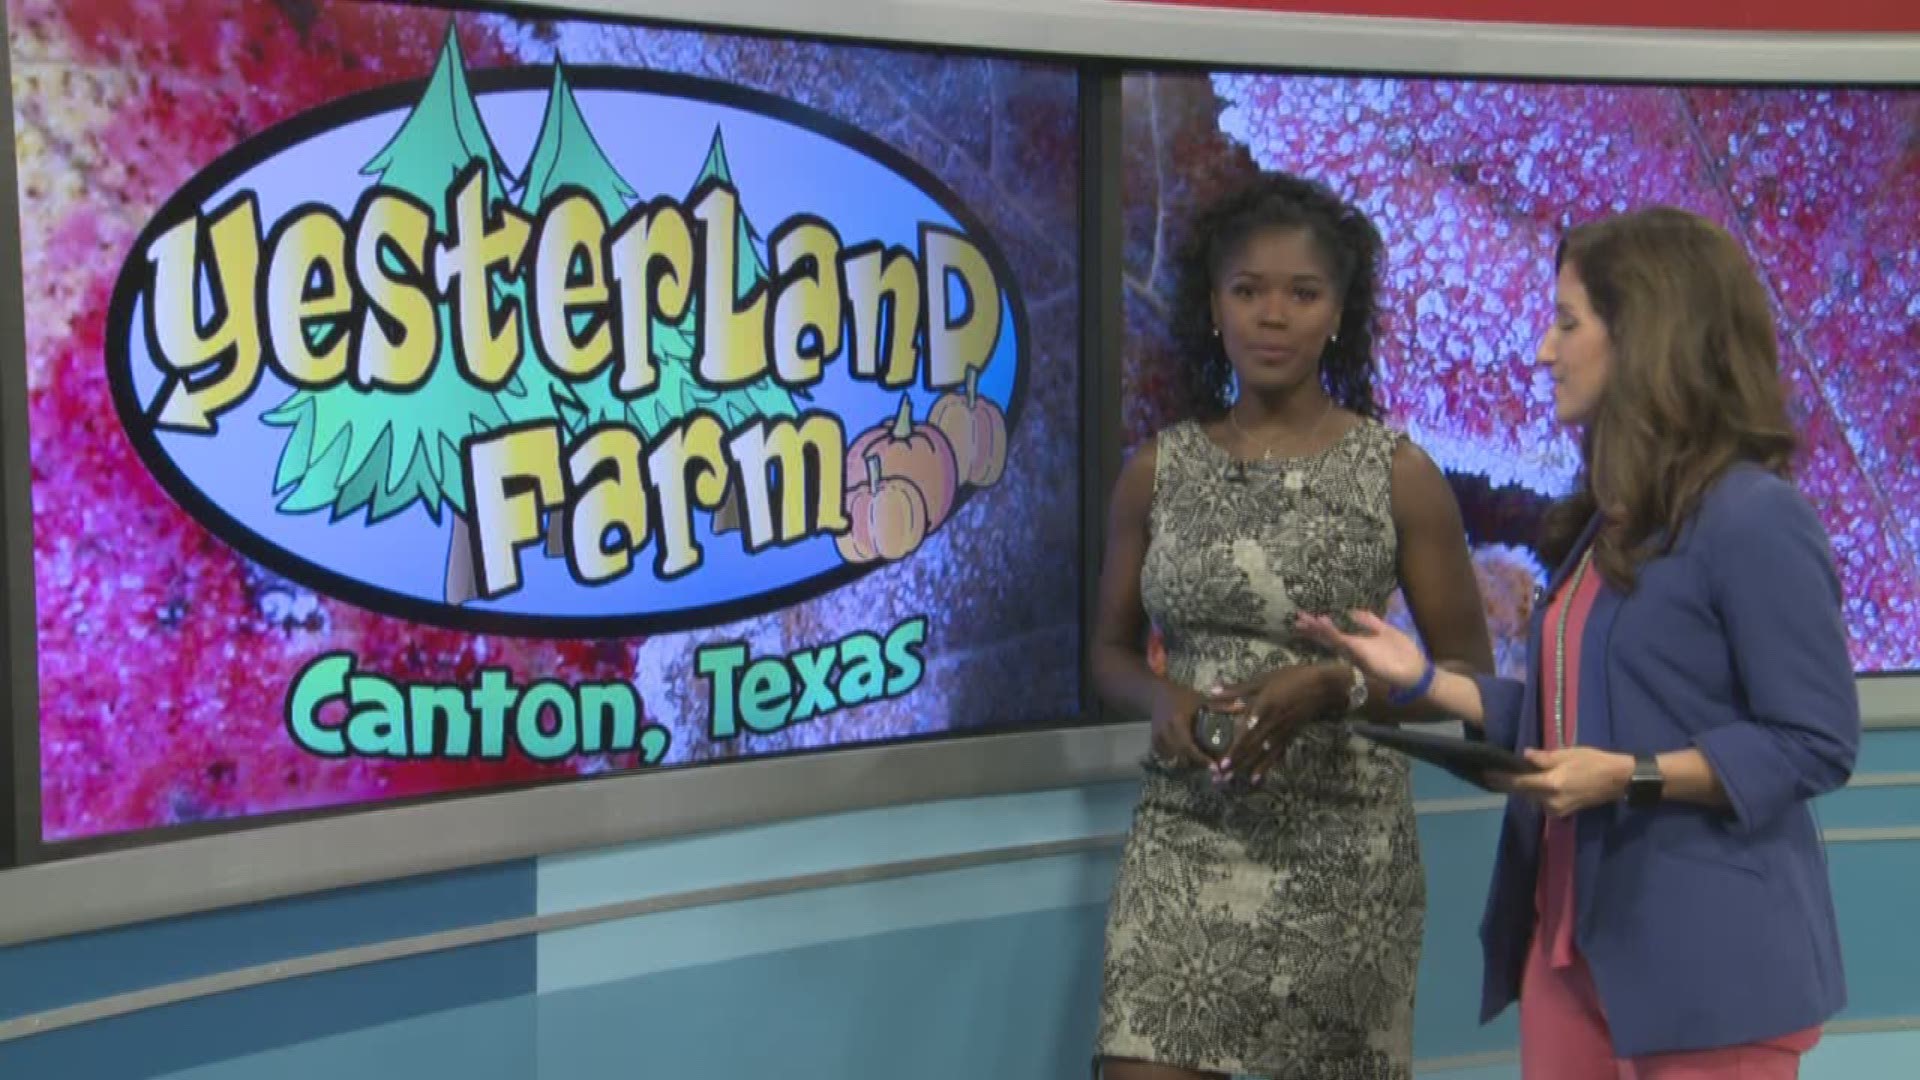 Yesterland Farm to reopen to the public after the April tornadoes.